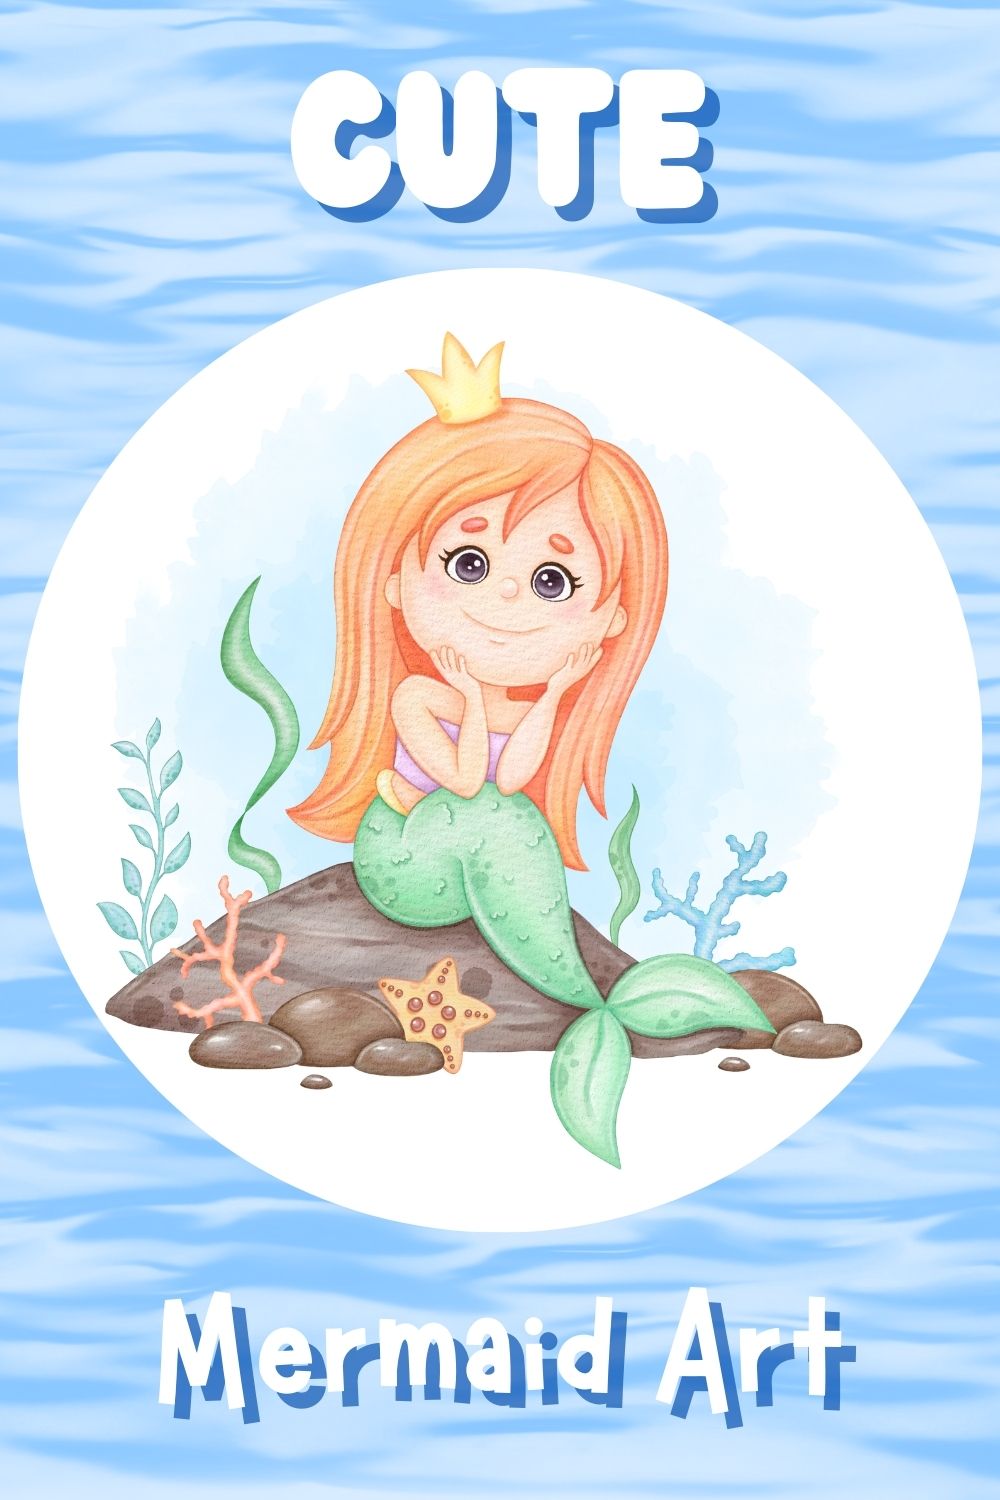 Colorful and cute mermaid art posters with encouraging messages for young girls.